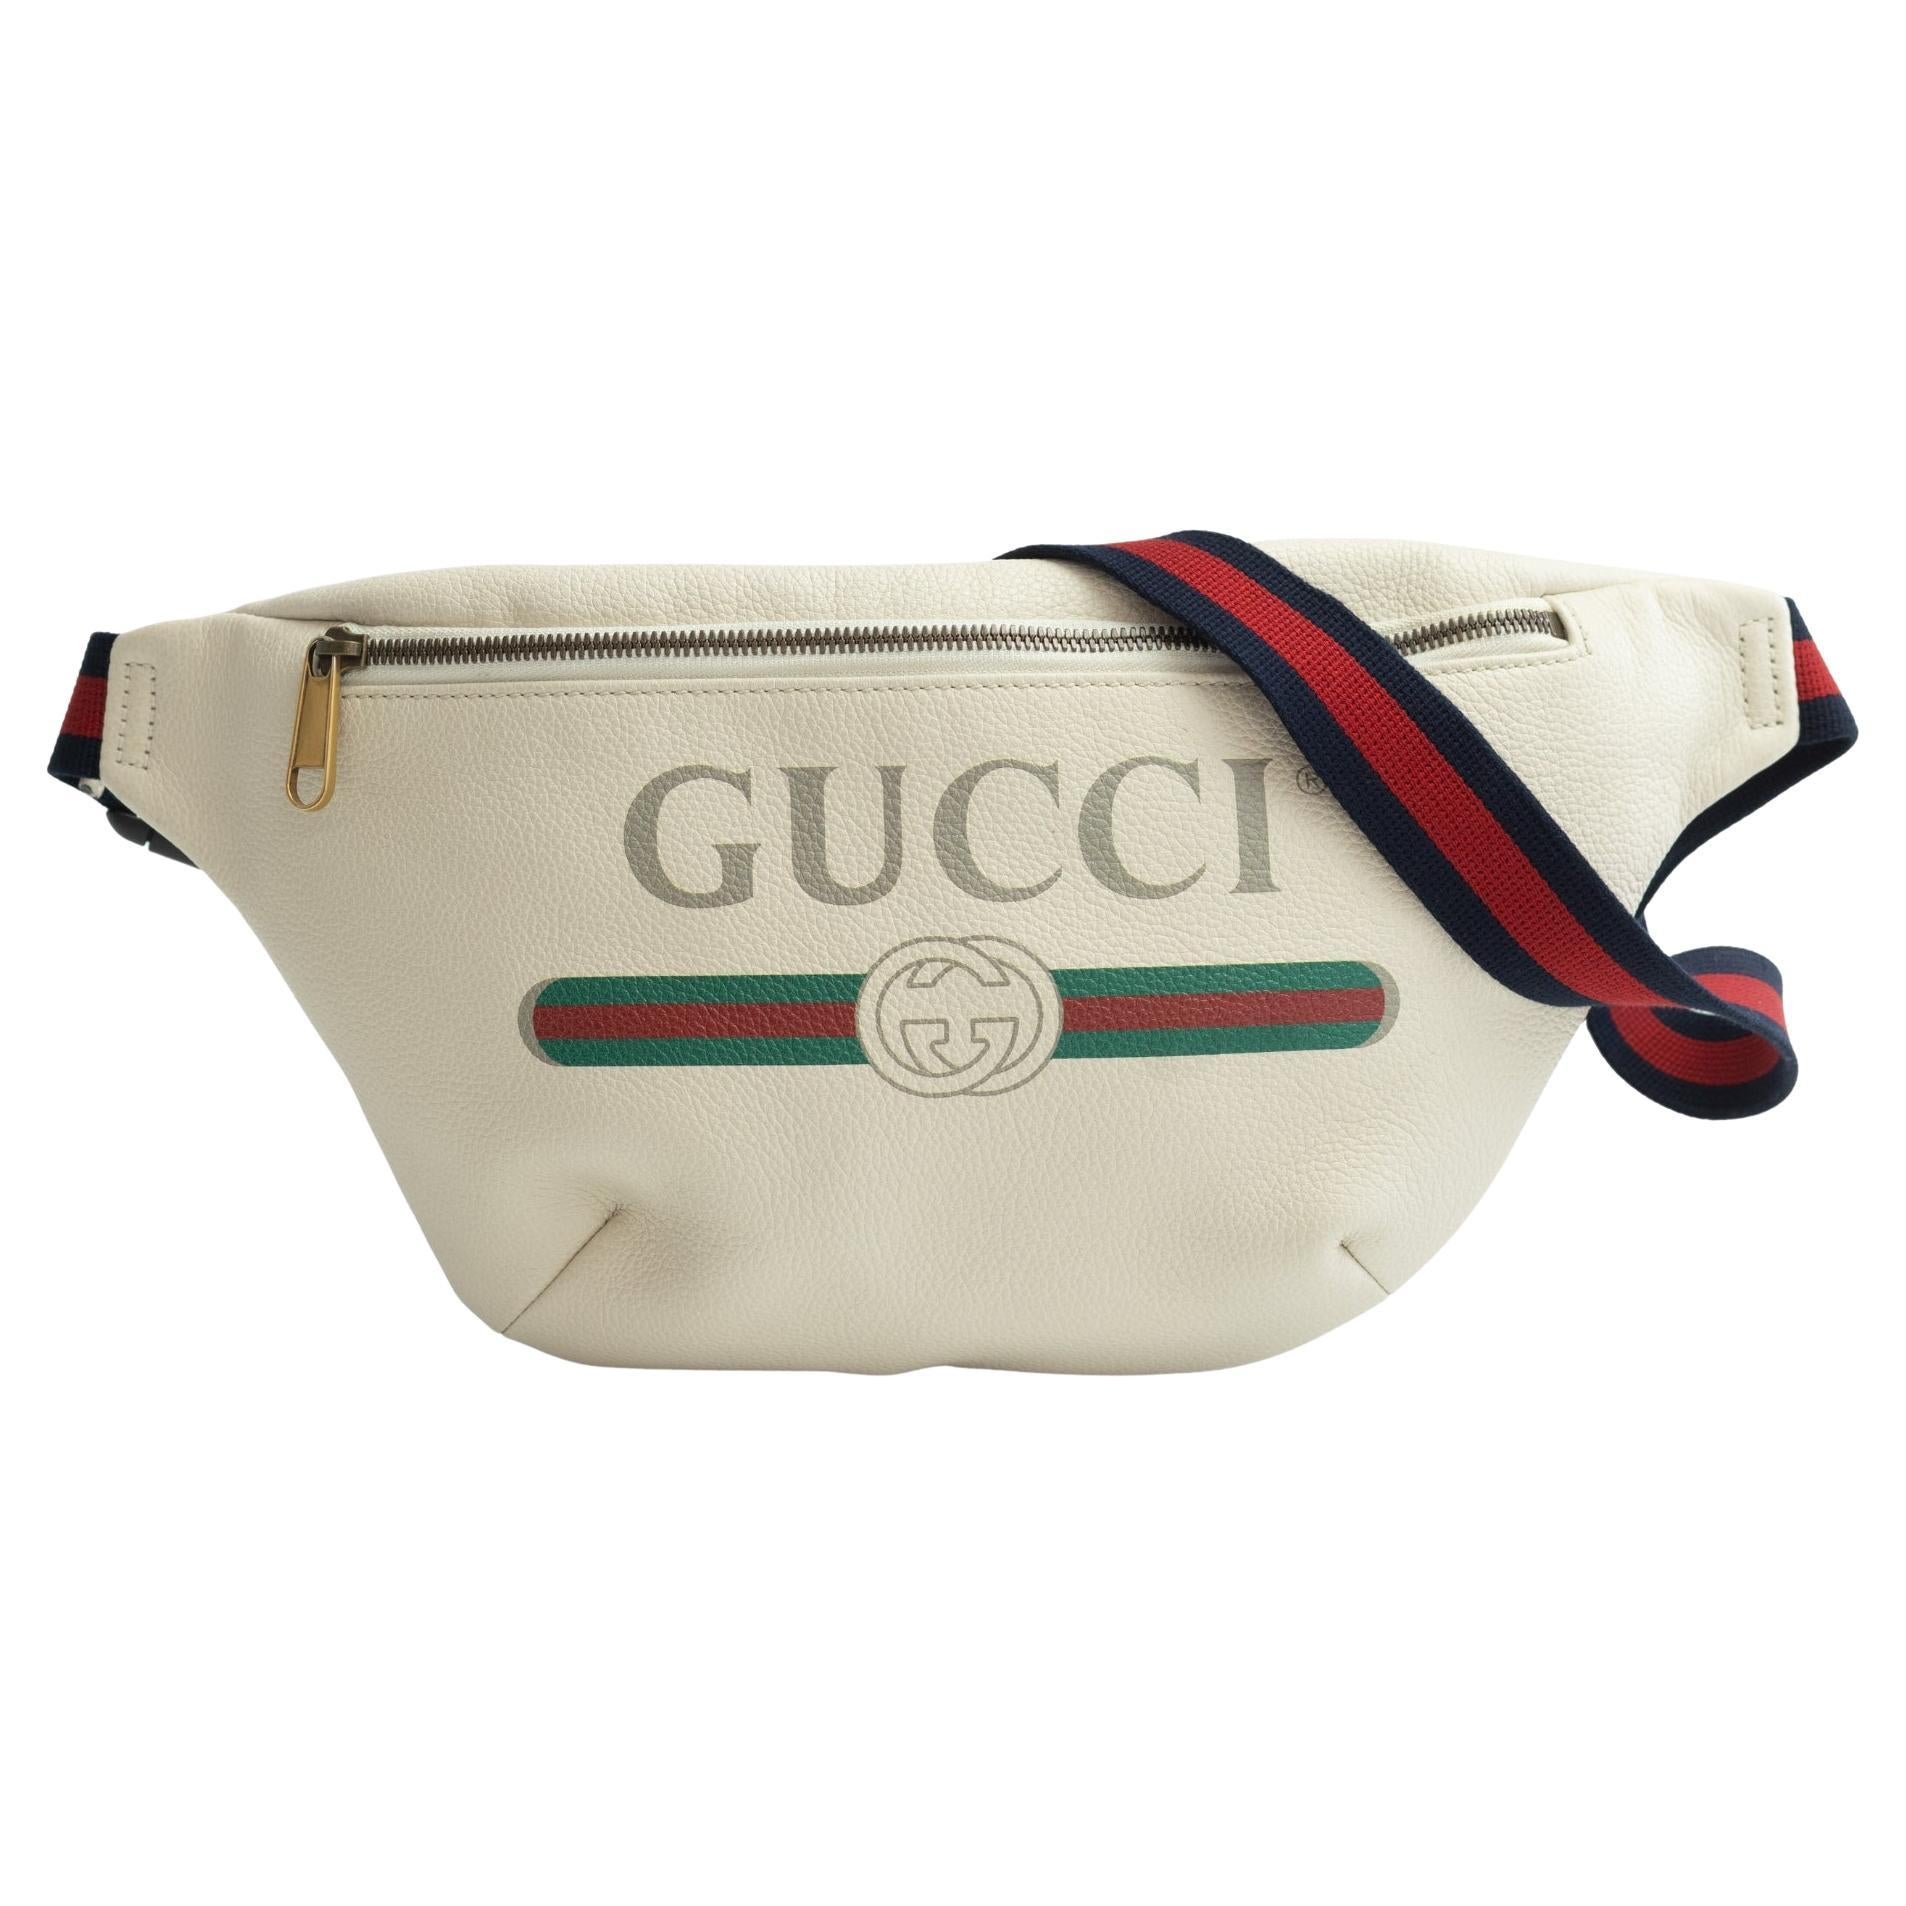 Gucci Drops a Vintage-Style Leather Belt Bag | Hypebeast